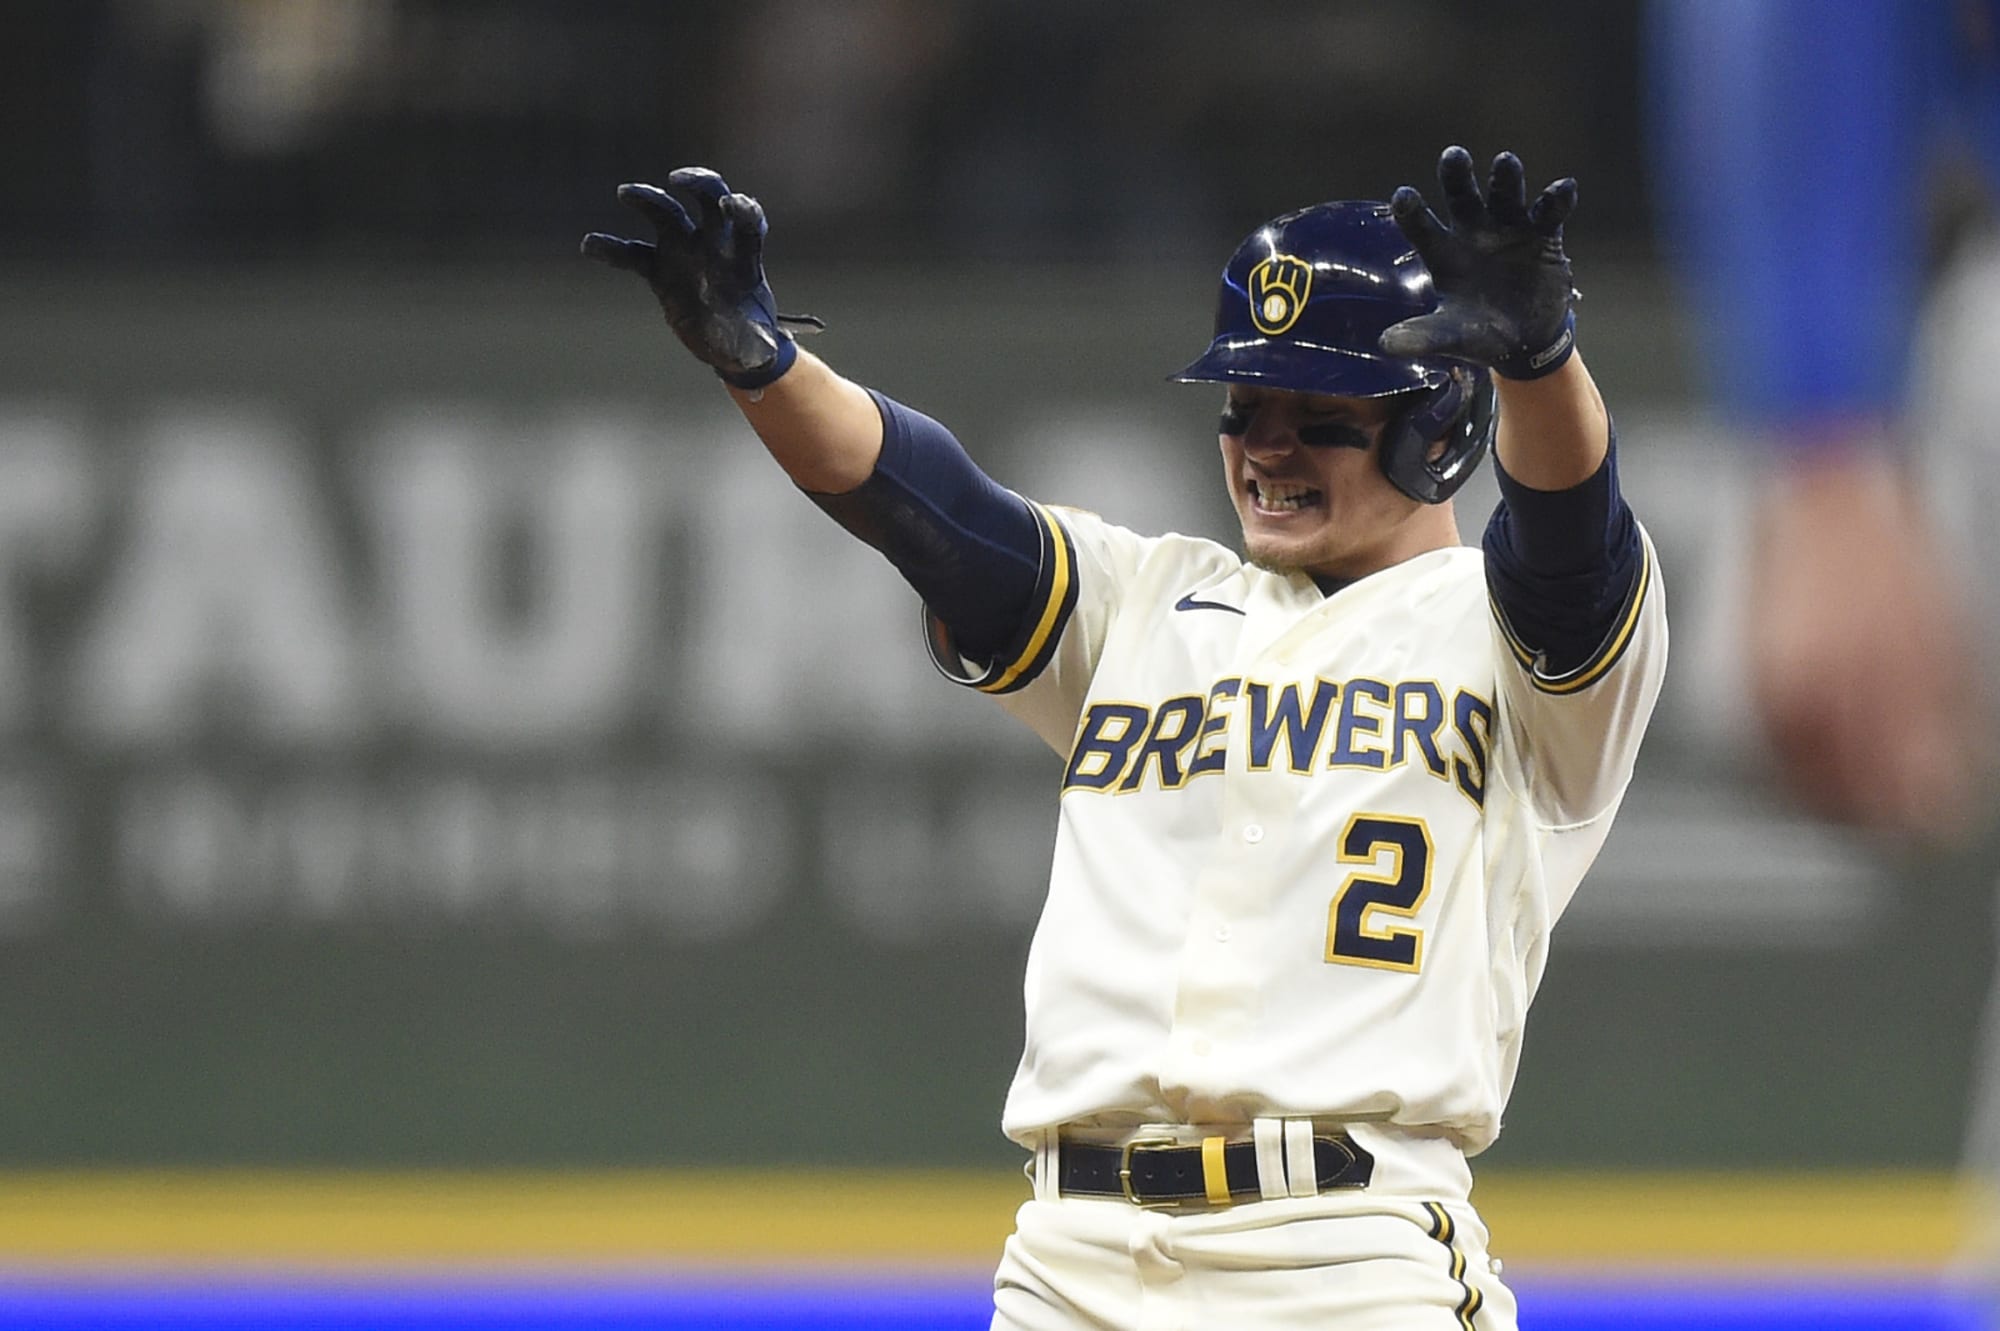 Brewers: Luis Urias Reaches Super Two Player Status